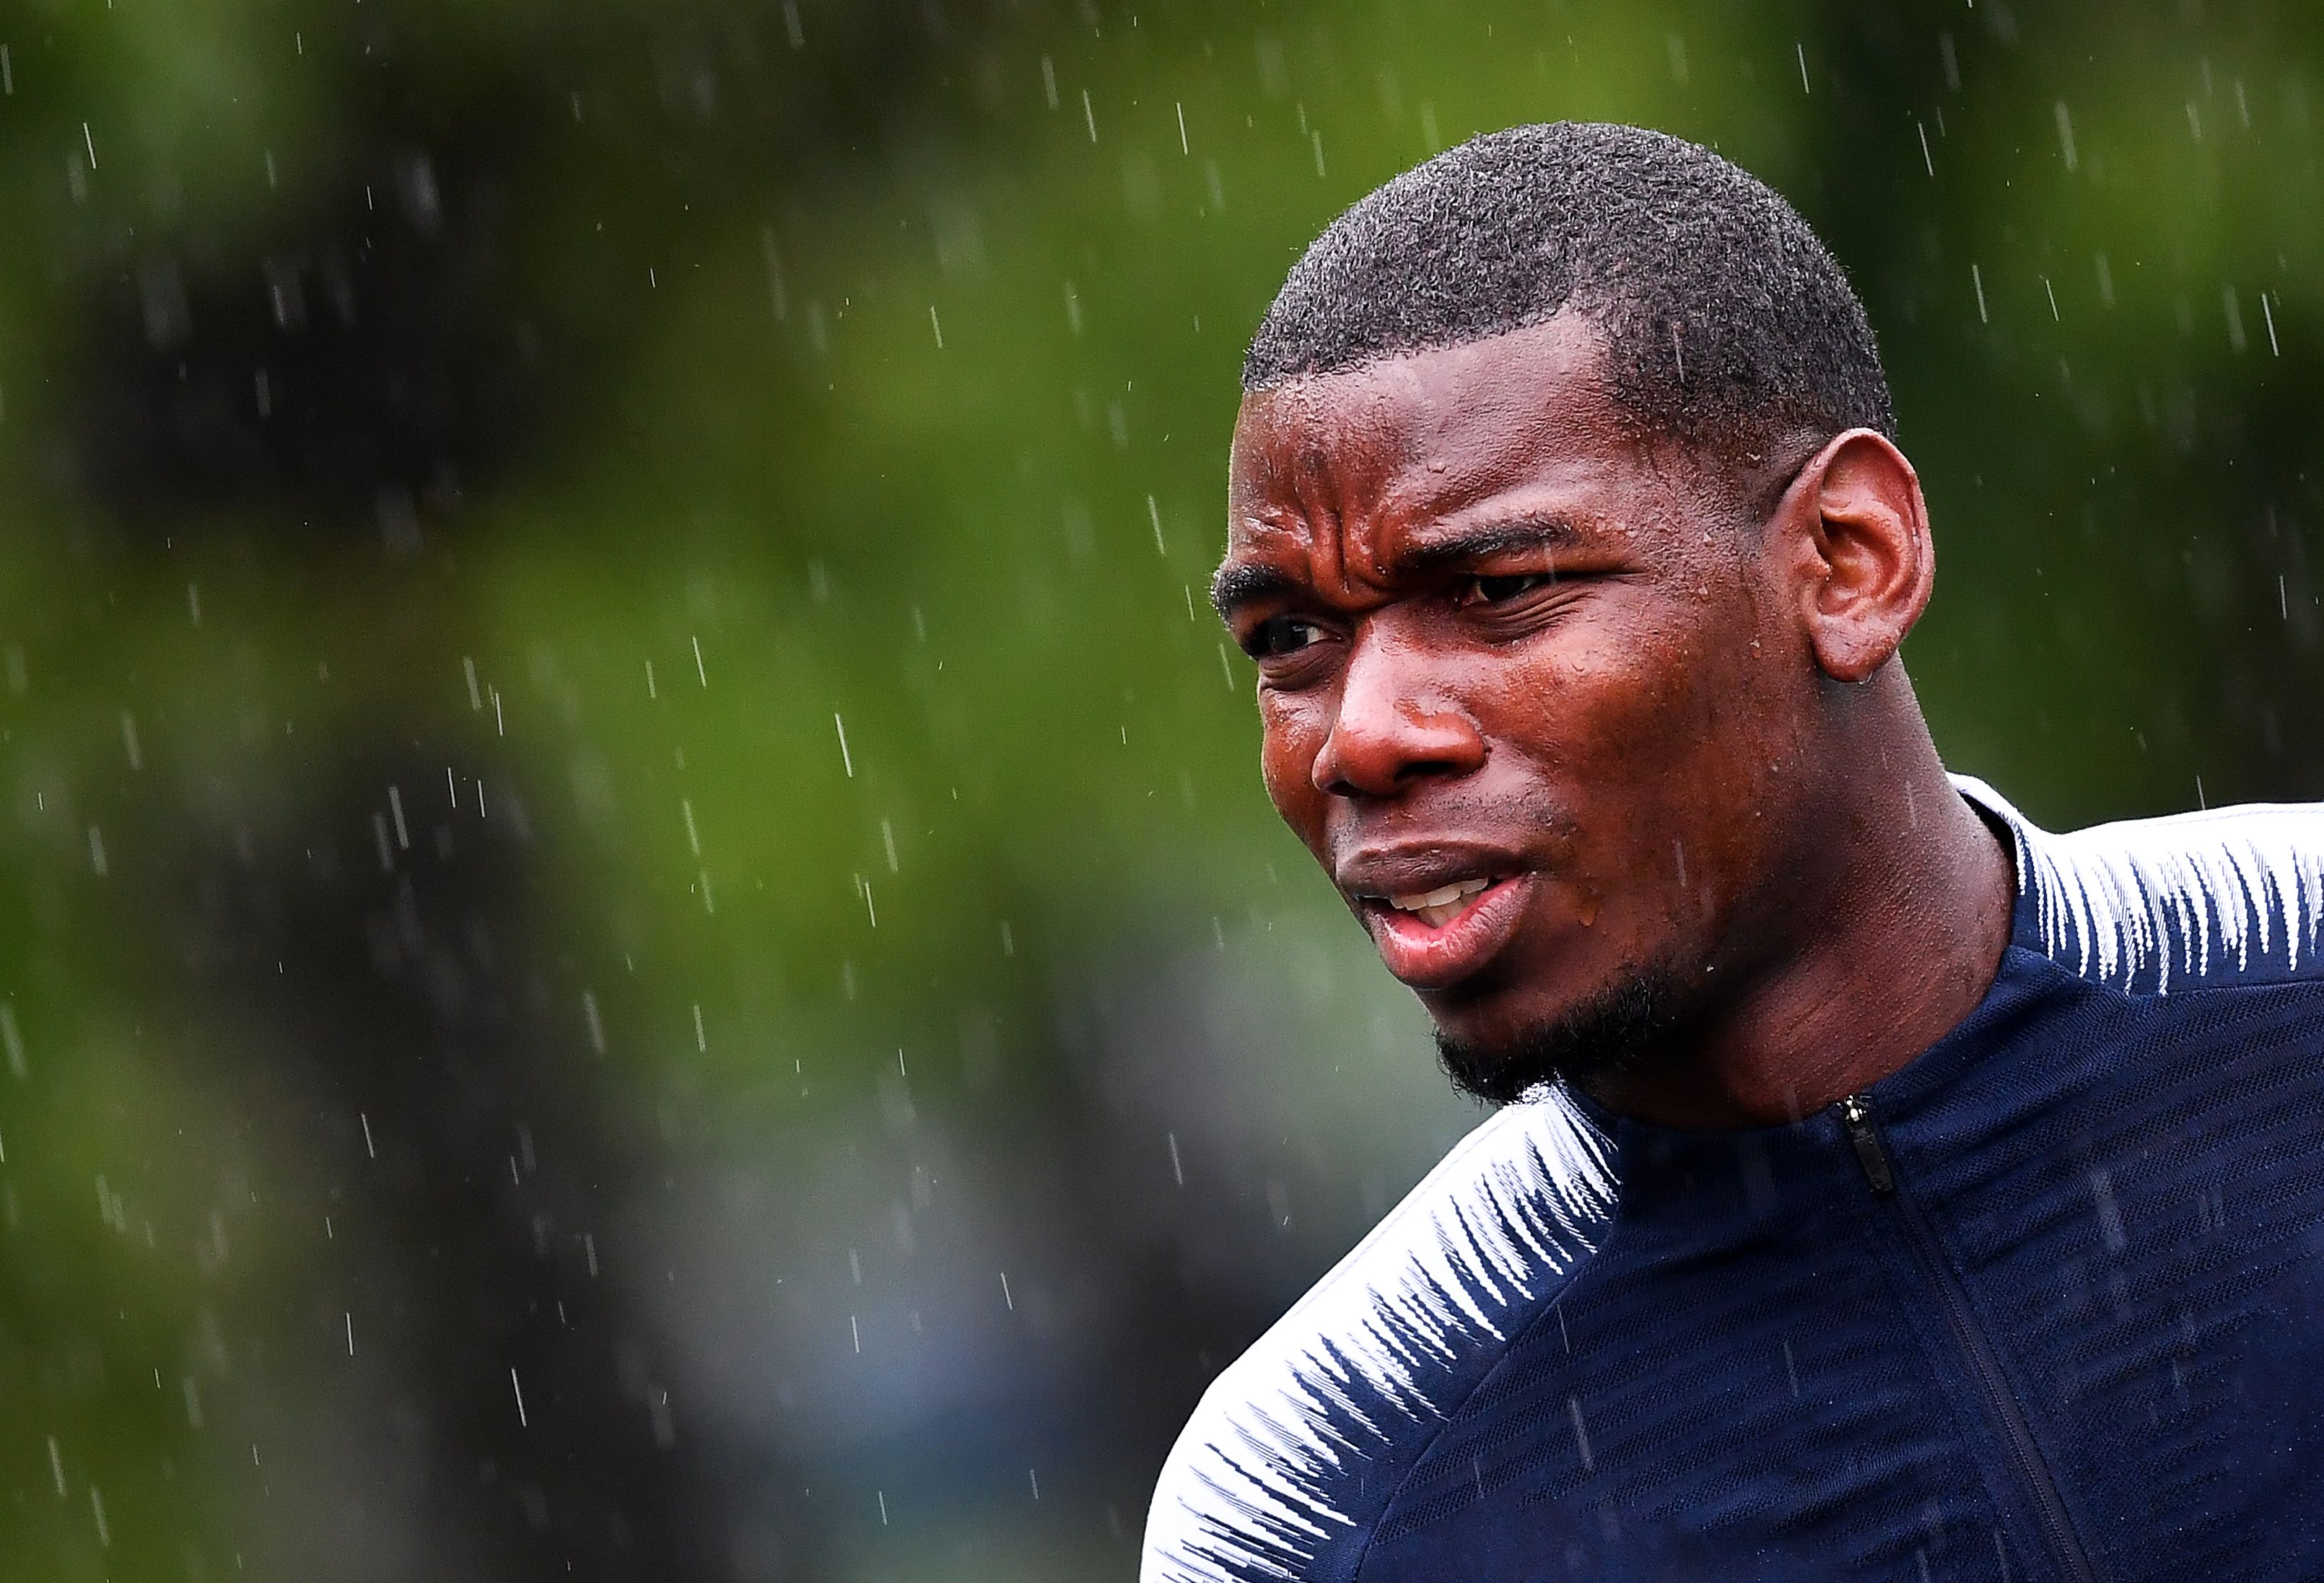 France's national football midfielder Paul Pogba arrives for a training session in Clairefontaine en Yvelines on June 5, 2019 as part of the team's preparation for the upcoming Euro 2020 qualification matches against Turkey and Andorra. (Photo by FRANCK FIFE / AFP)        (Photo credit should read FRANCK FIFE/AFP/Getty Images)